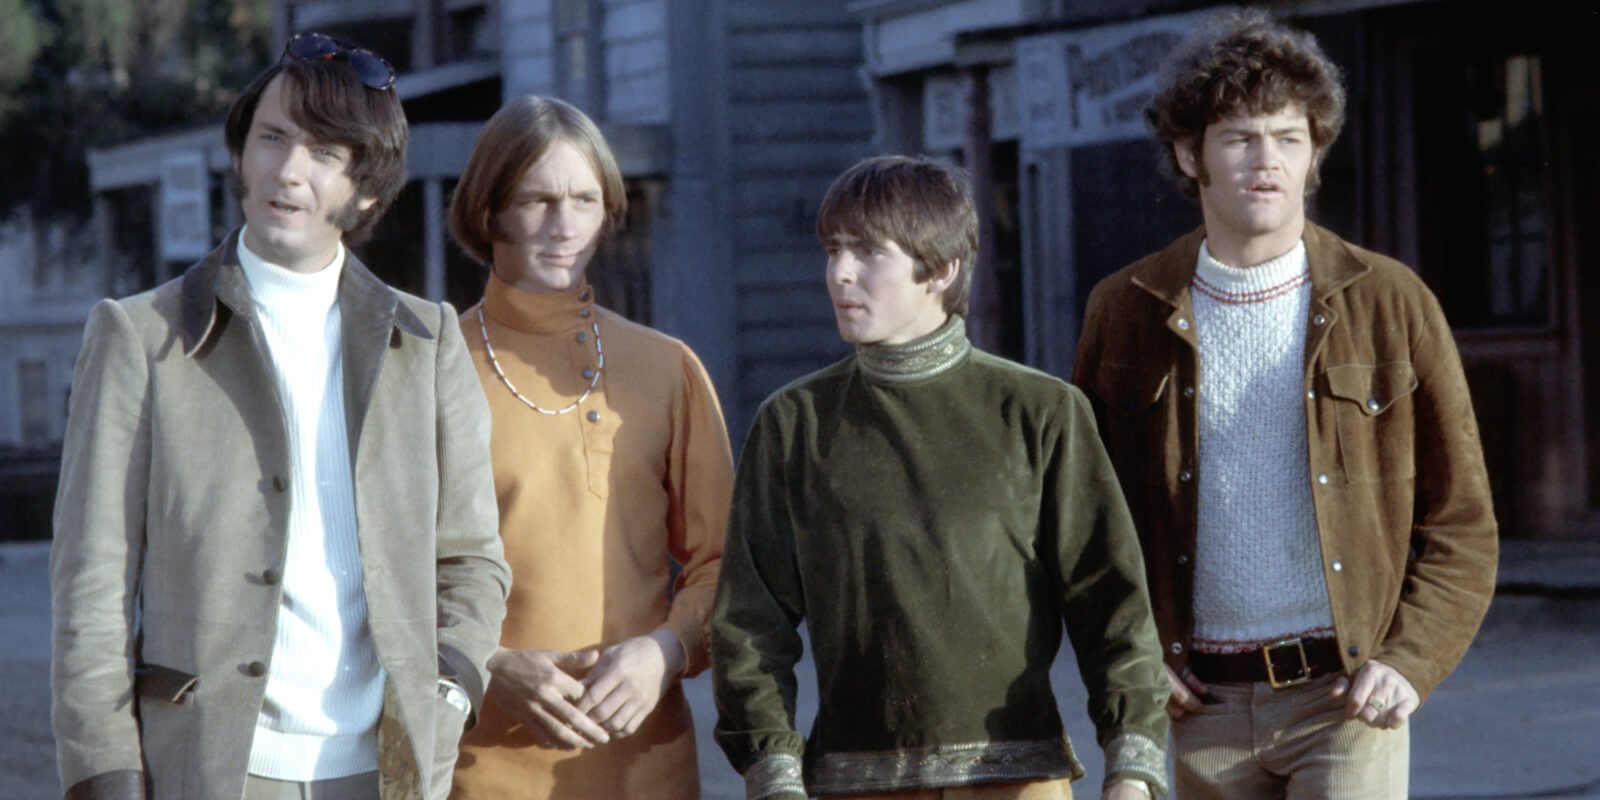 The Monkees released their first and only feature film 'Head' in 1968.